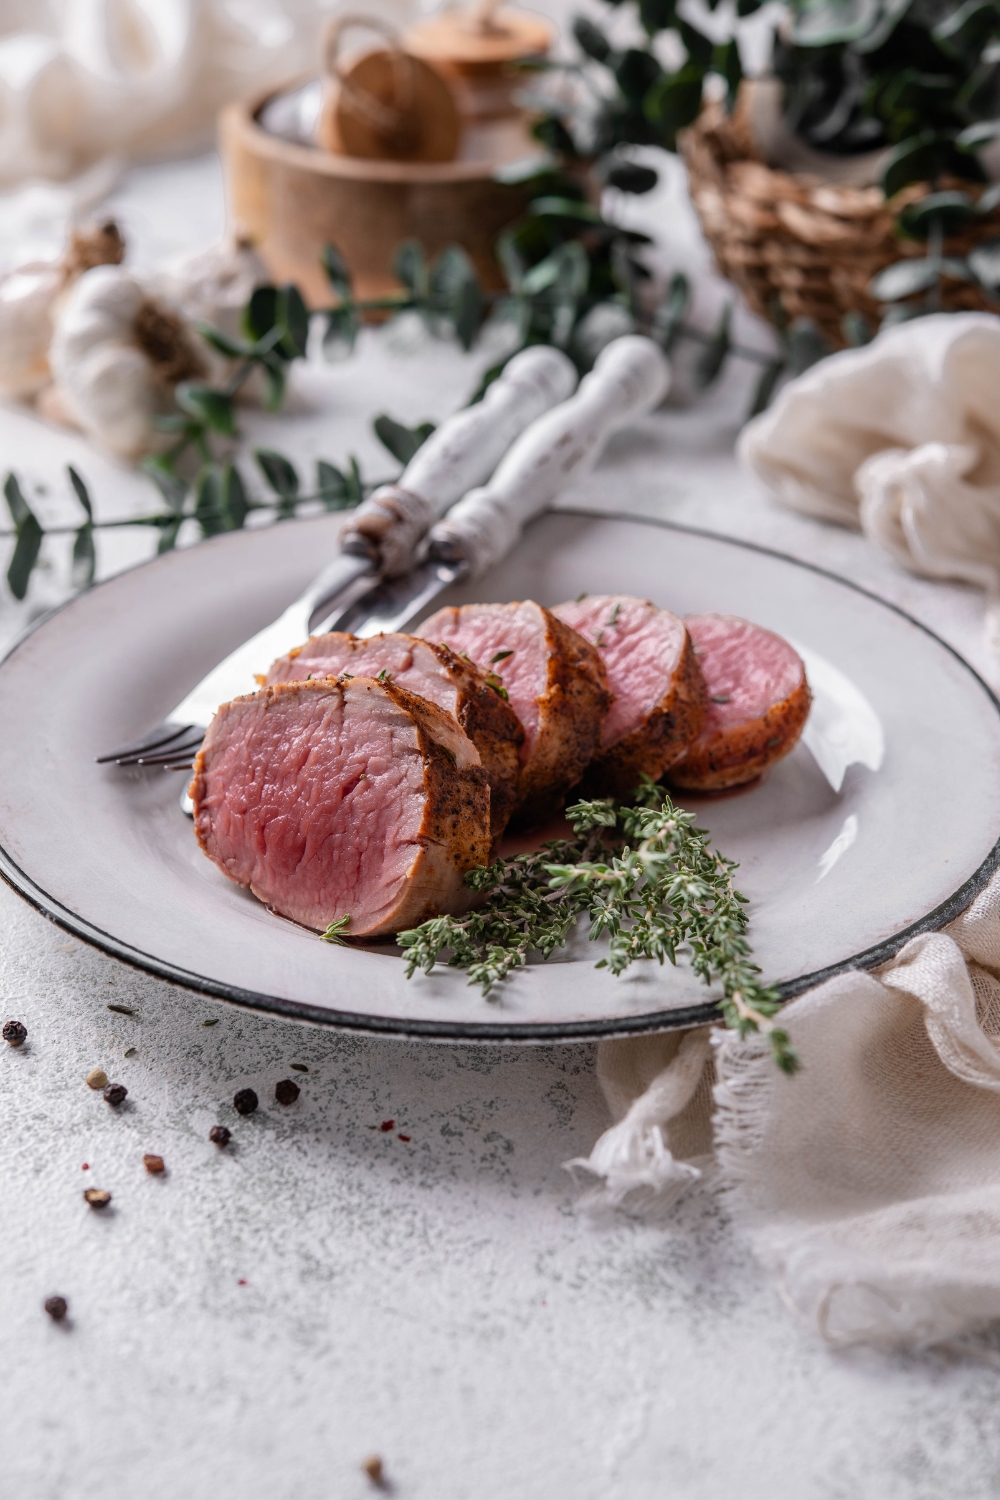 A white plate holds a sliced venison tenderloin. A sprig of fresh herbs is on the plate as well.